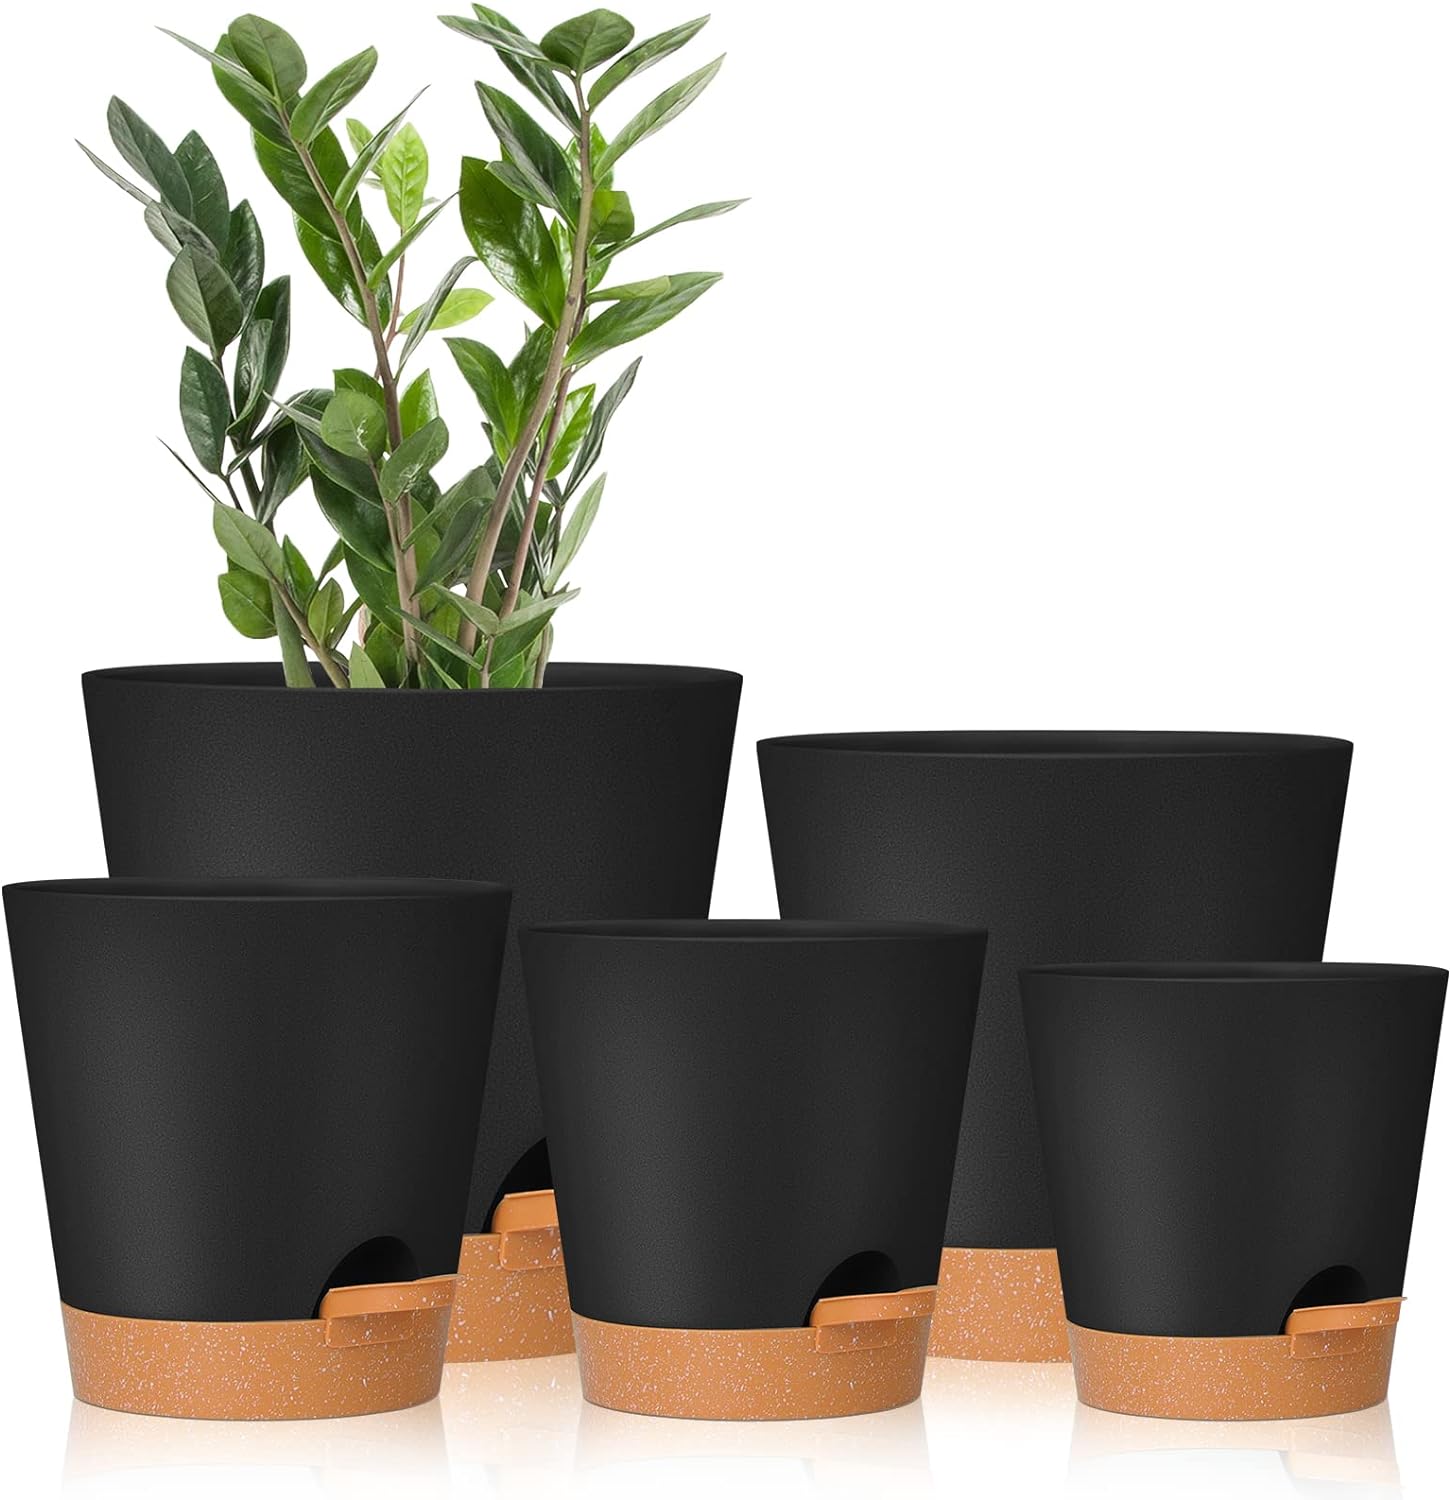 GARDIFE Plant Pots 7/6.5/6/5.5/5 Inch Self Watering Planters with Drainage Hole, Plastic Flower Pots, Nursery Planting Pot for All House Plants, African Violet, Flowers, and Cactus,Black